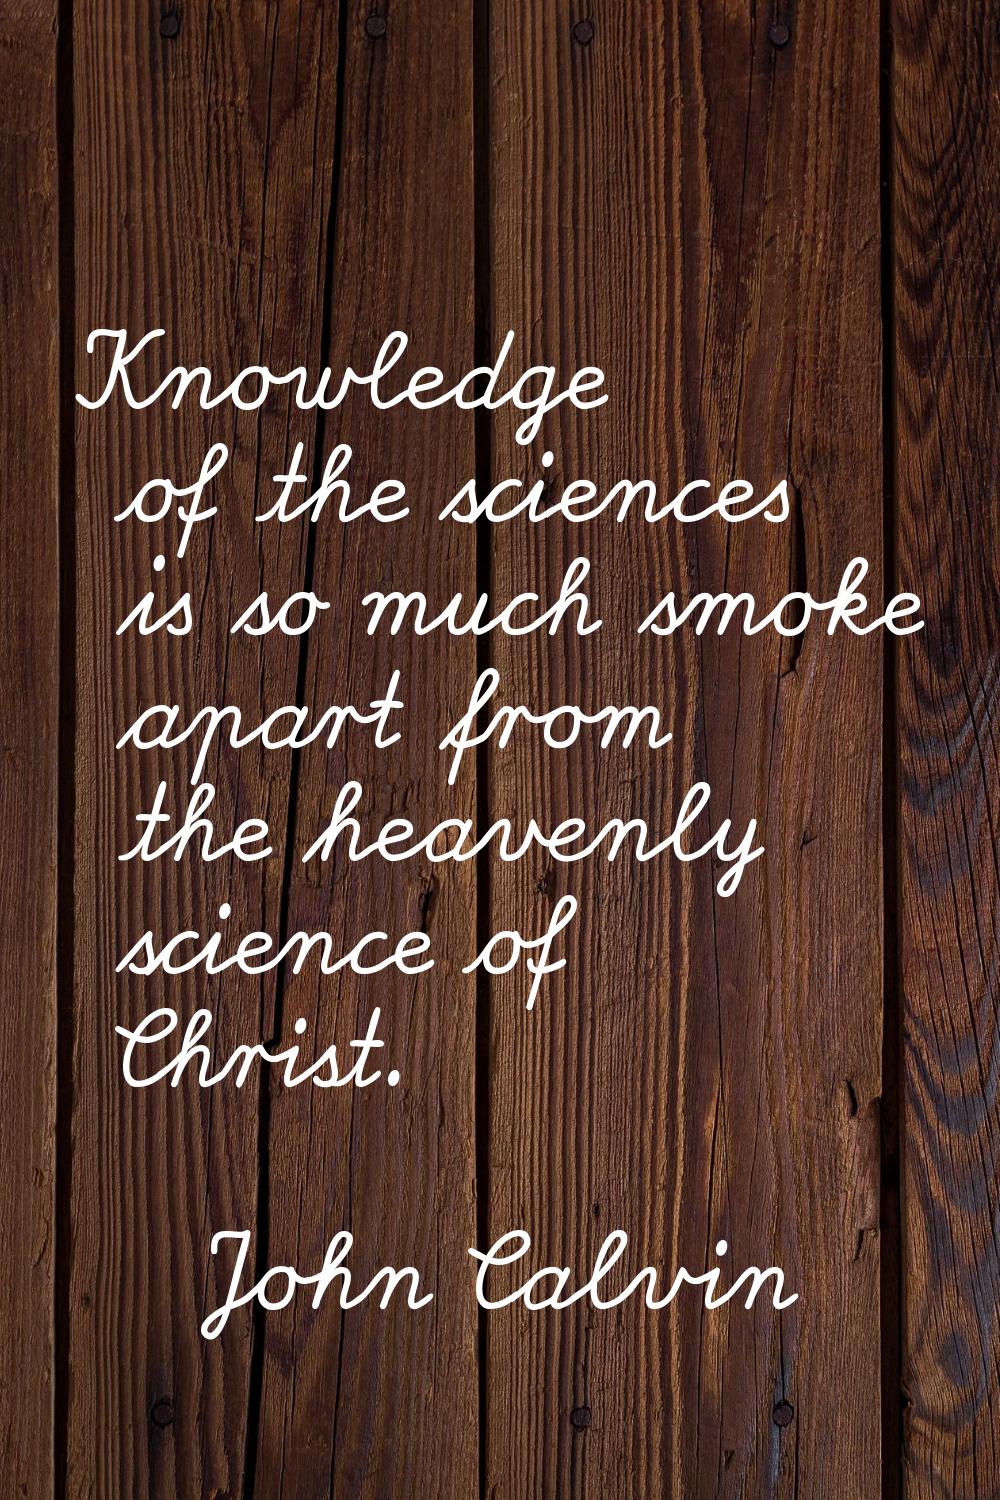 Knowledge of the sciences is so much smoke apart from the heavenly science of Christ.